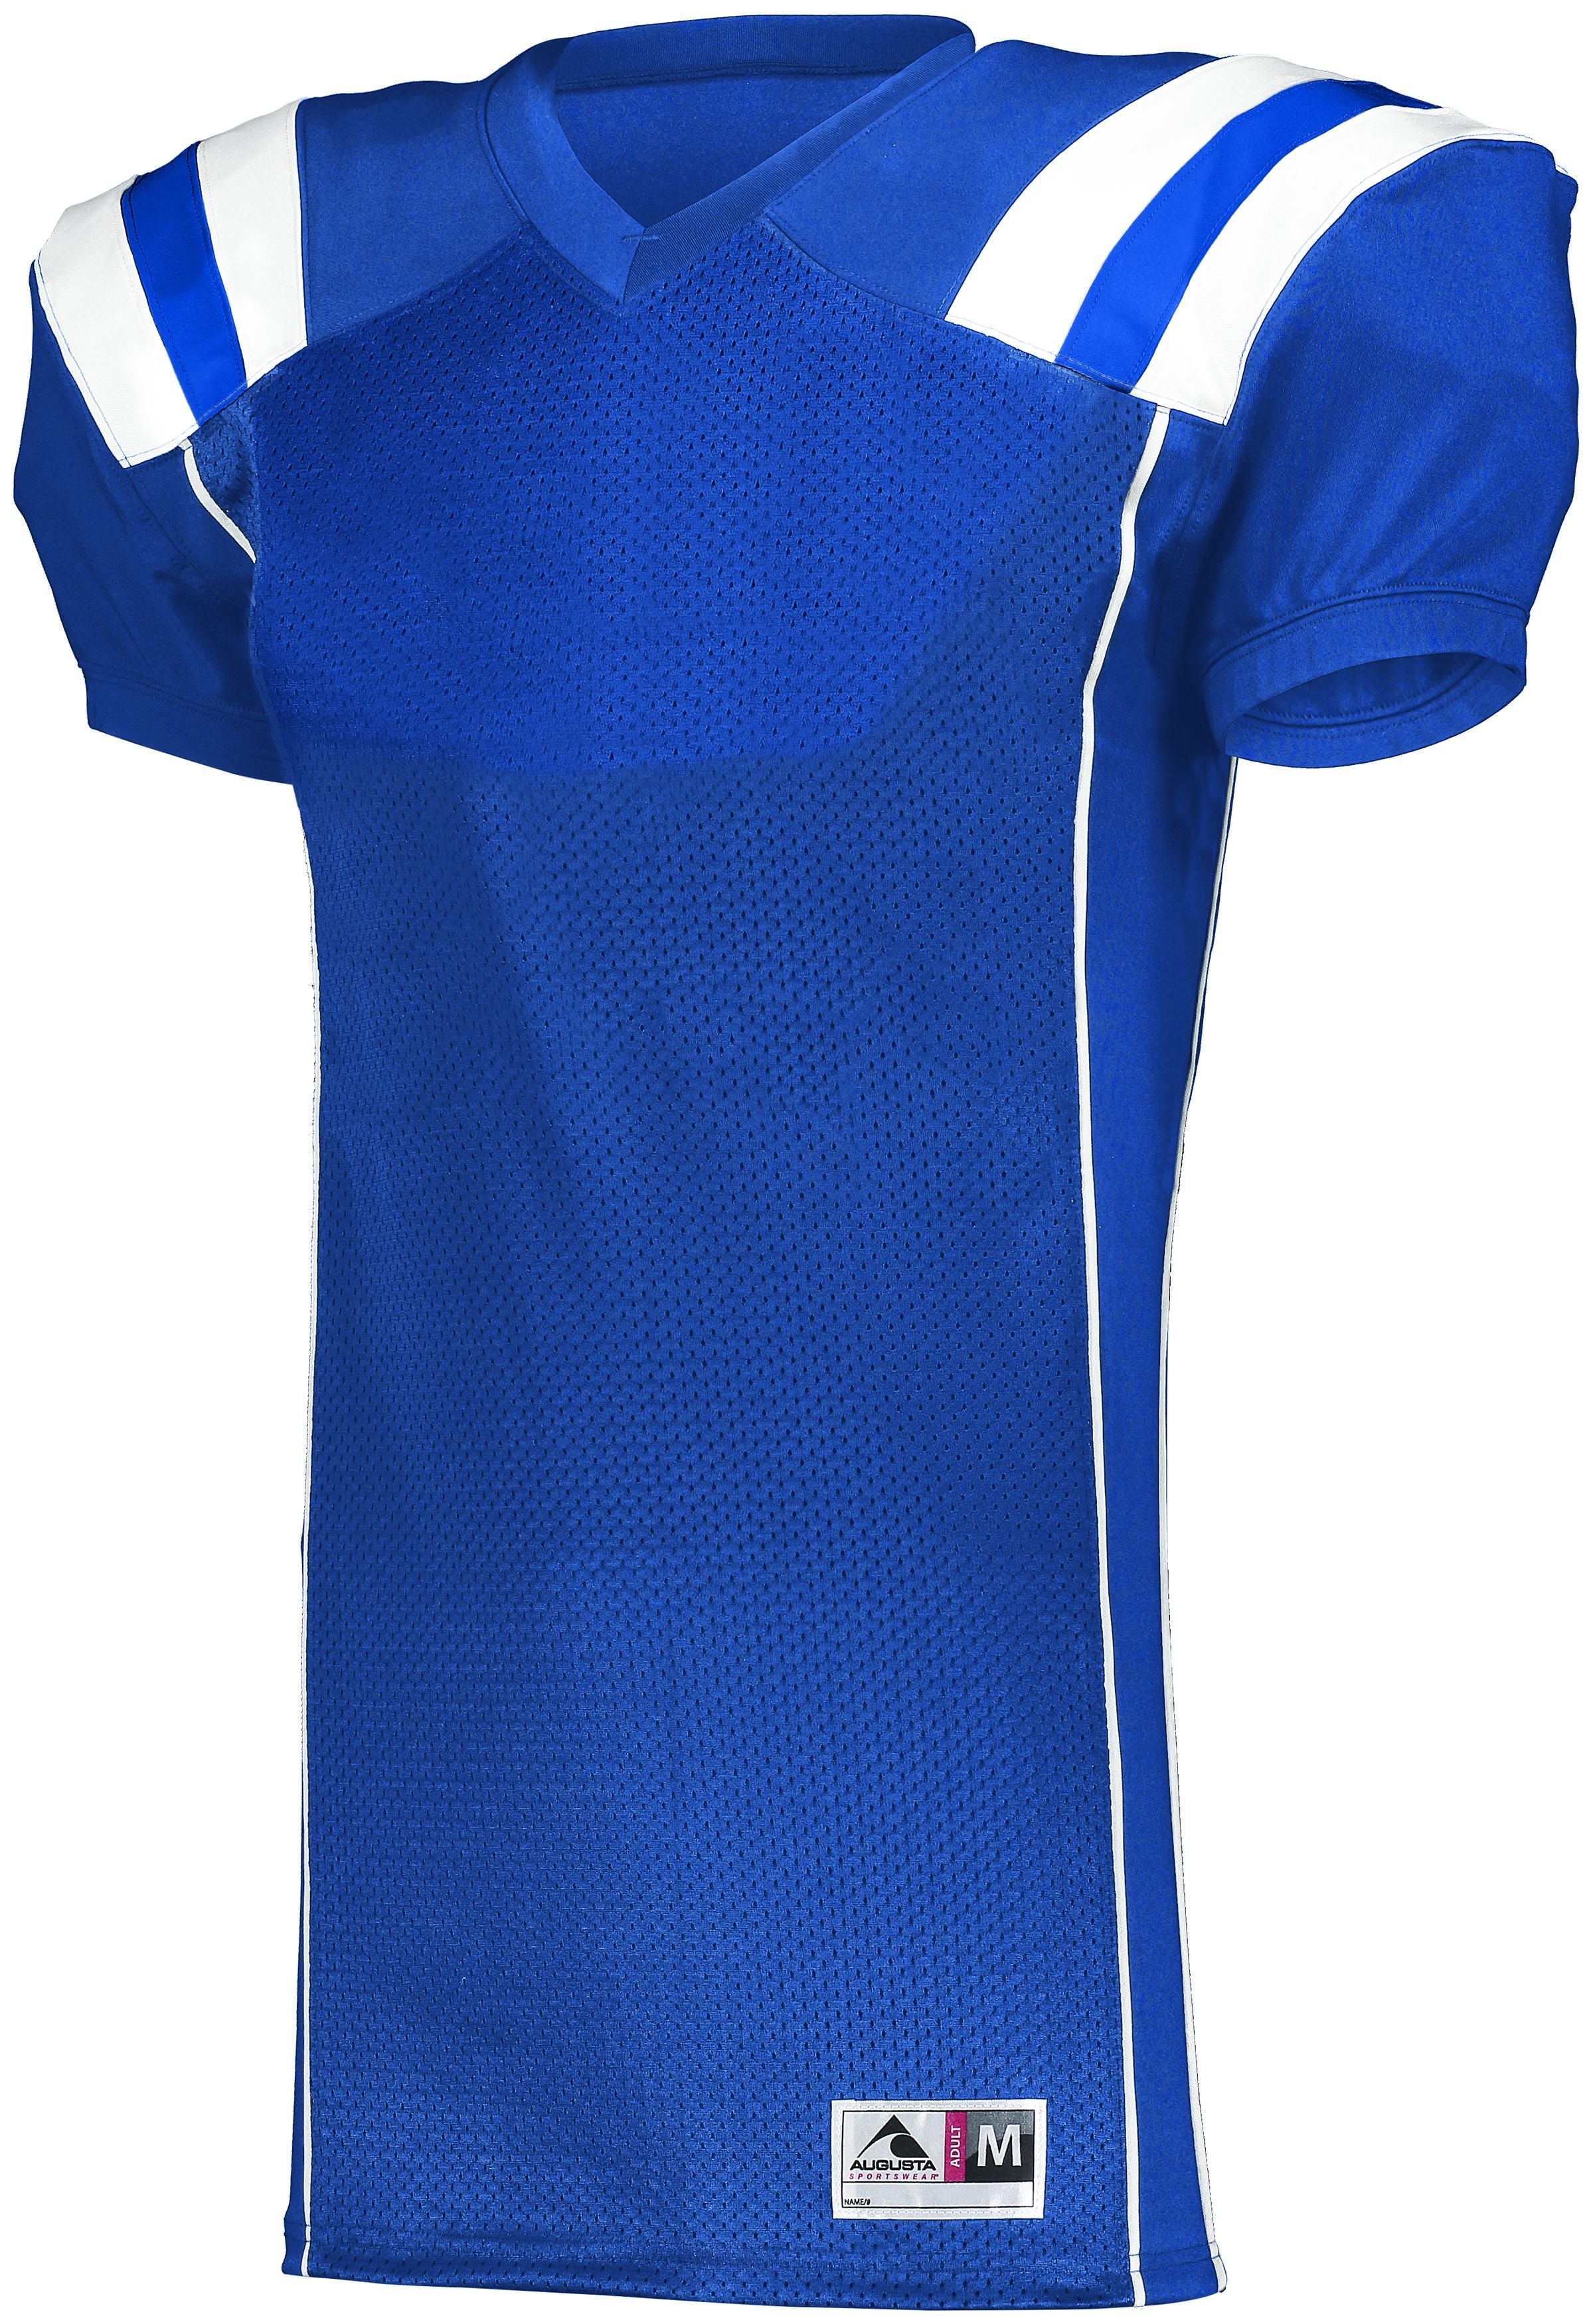 Augusta Sportswear Youth Tform Football Jersey in Royal/White  -Part of the Youth, Youth-Jersey, Augusta-Products, Football, Shirts, All-Sports, All-Sports-1 product lines at KanaleyCreations.com